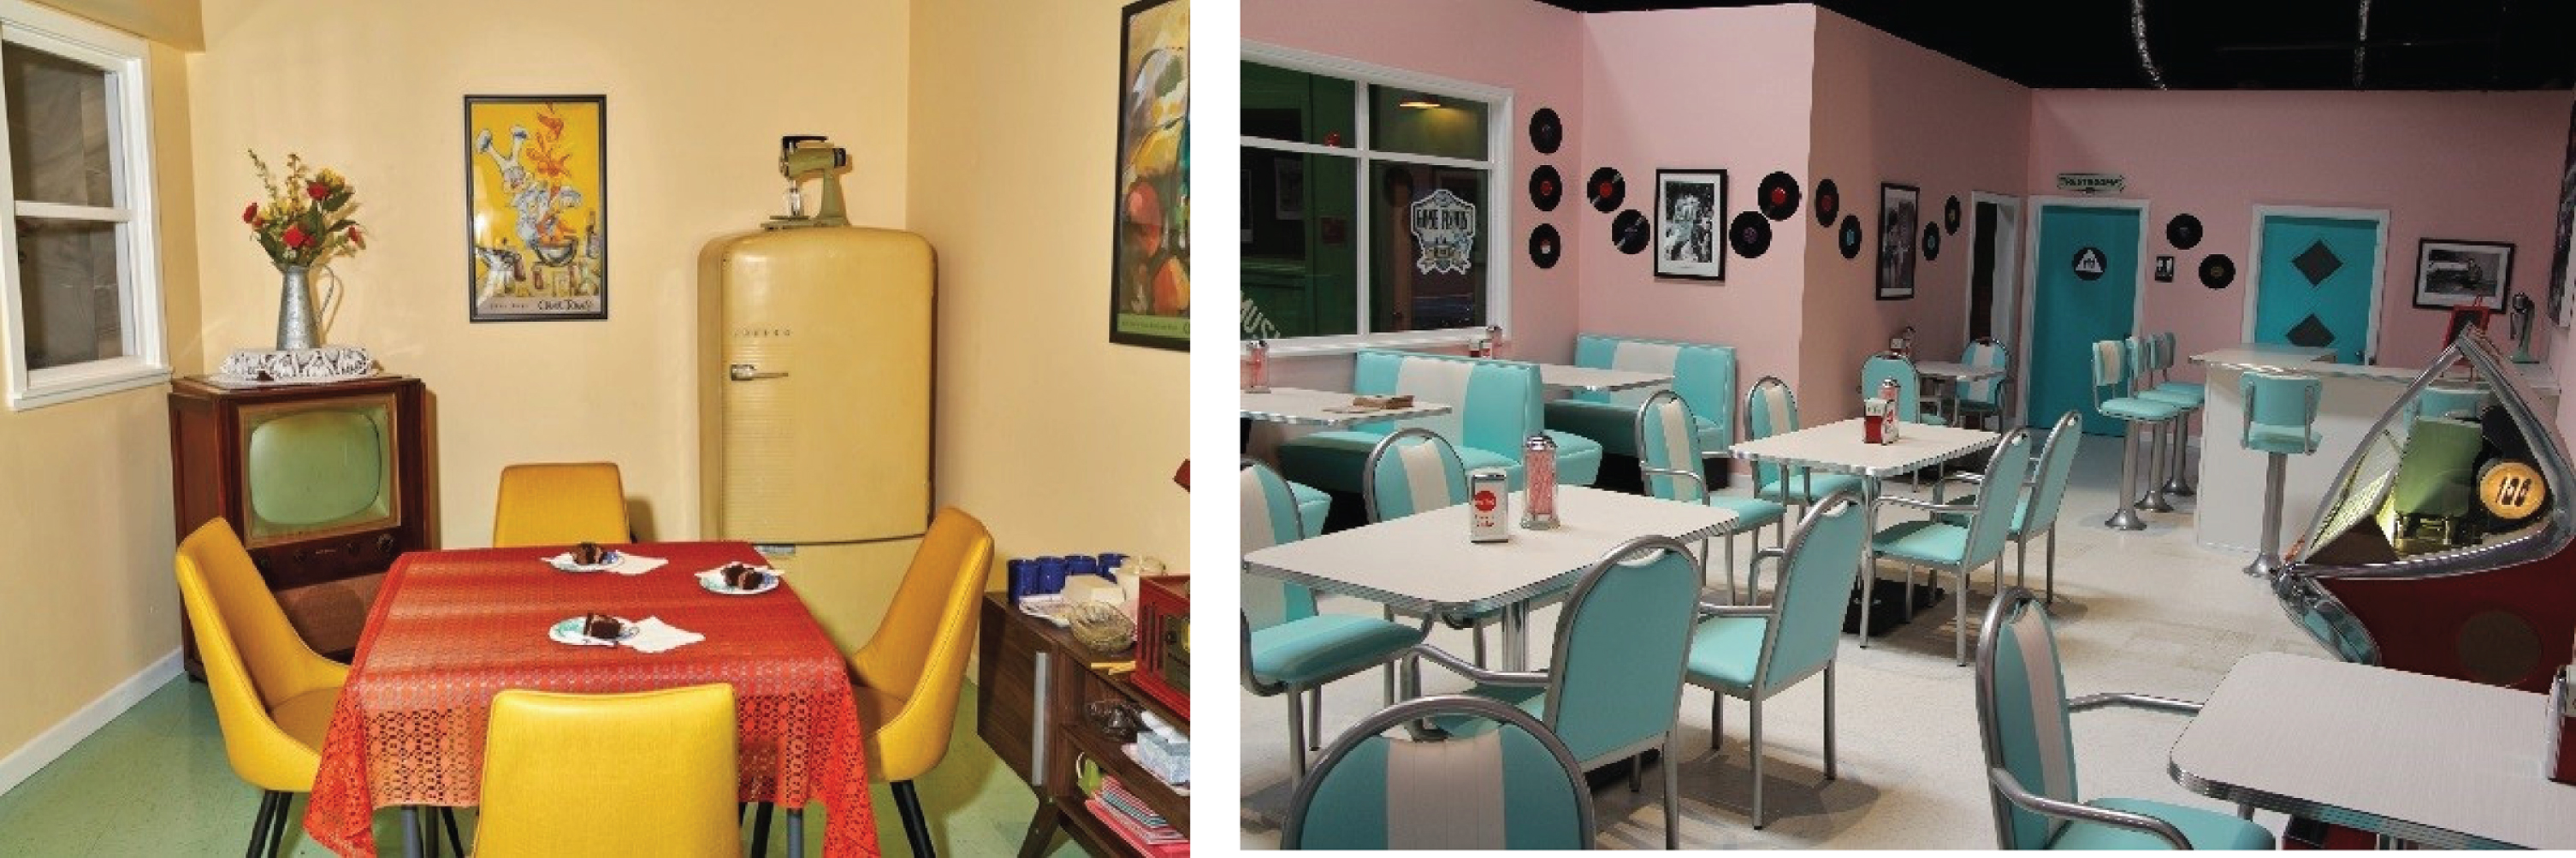 Glenner Town Square: A typical dining room at home and Rosie’s Diner. Reprinted with permission from the George G. Glenner Alzheimer’s Family Centers, Inc®.